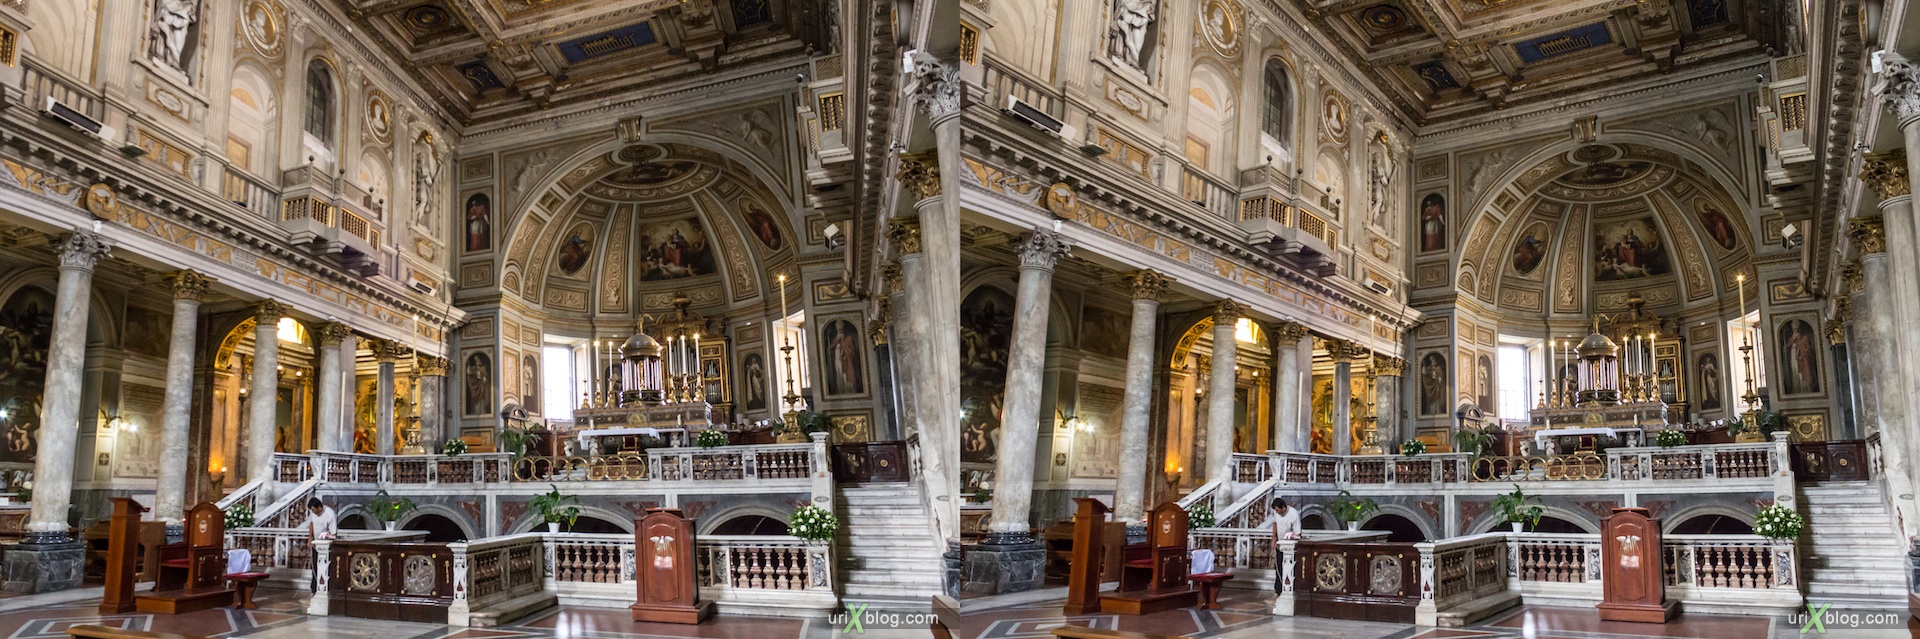 2012, church San Martino ai Monti, titolo Equizio, Rome, Italy, cathedral, monastery, Christianity, Catholicism, 3D, stereo pair, cross-eyed, crossview, cross view stereo pair